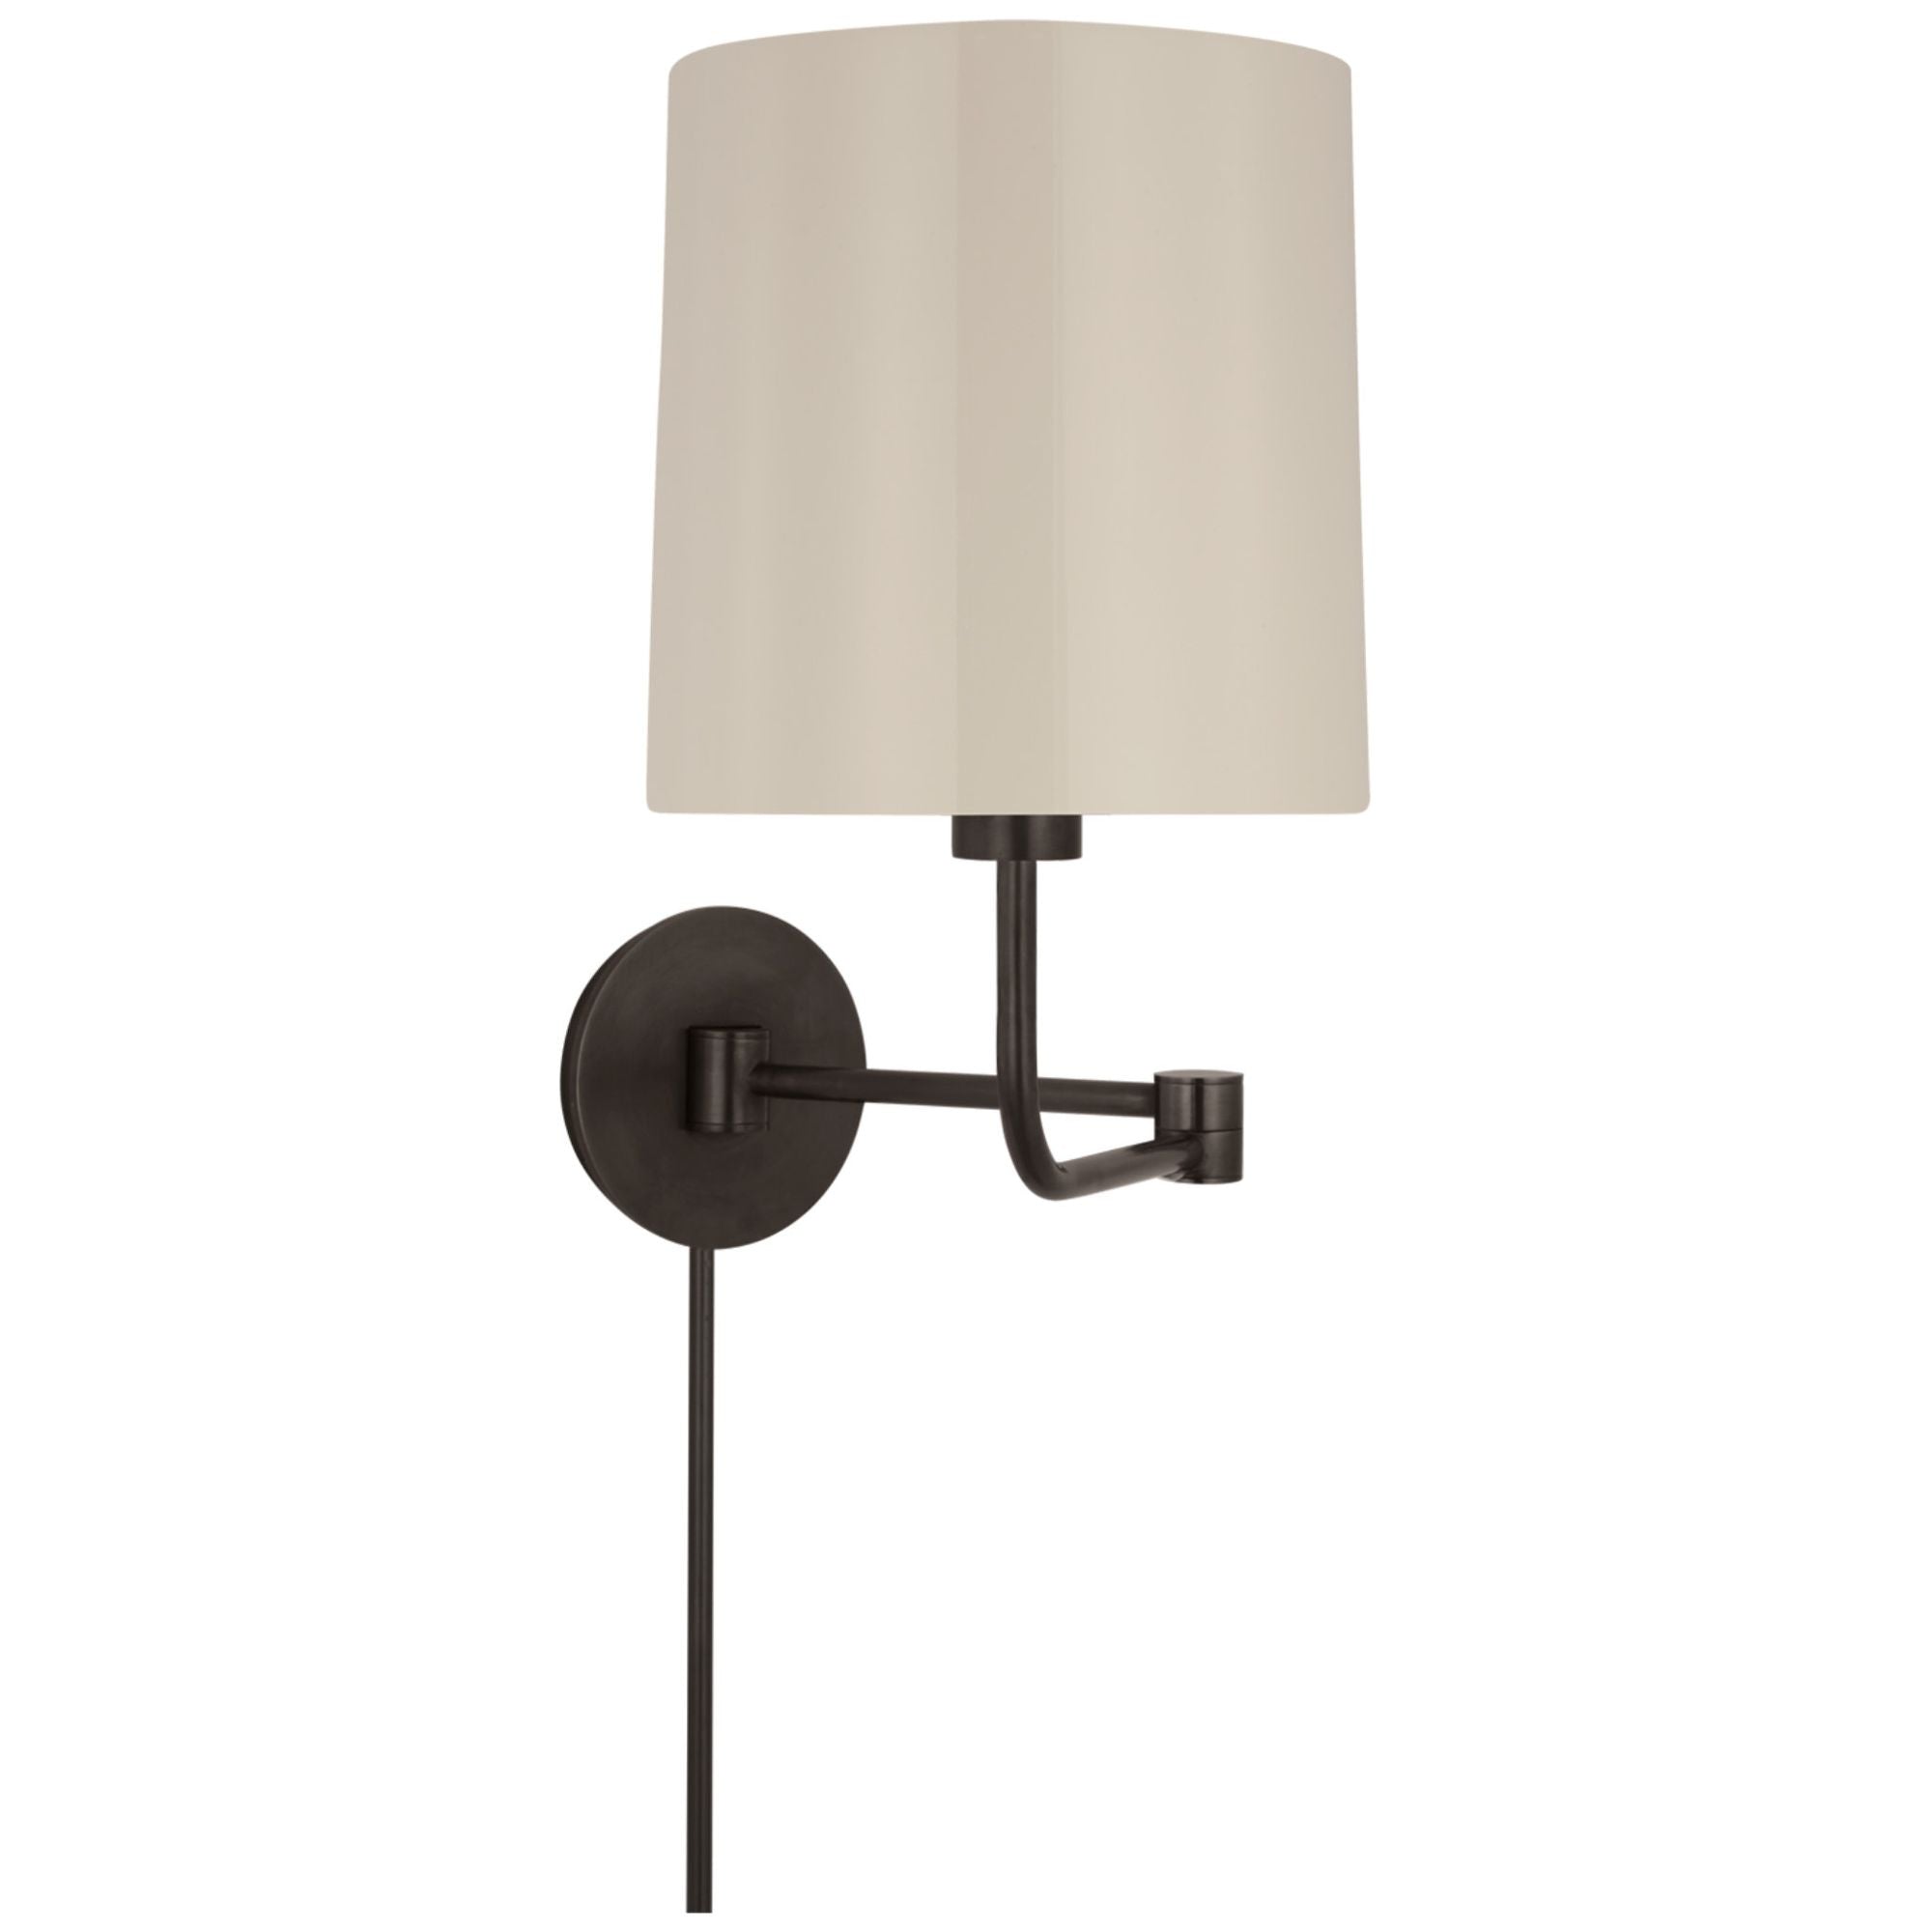 Barbara Barry Go Lightly Swing Arm Wall Light in Bronze with China White Shade